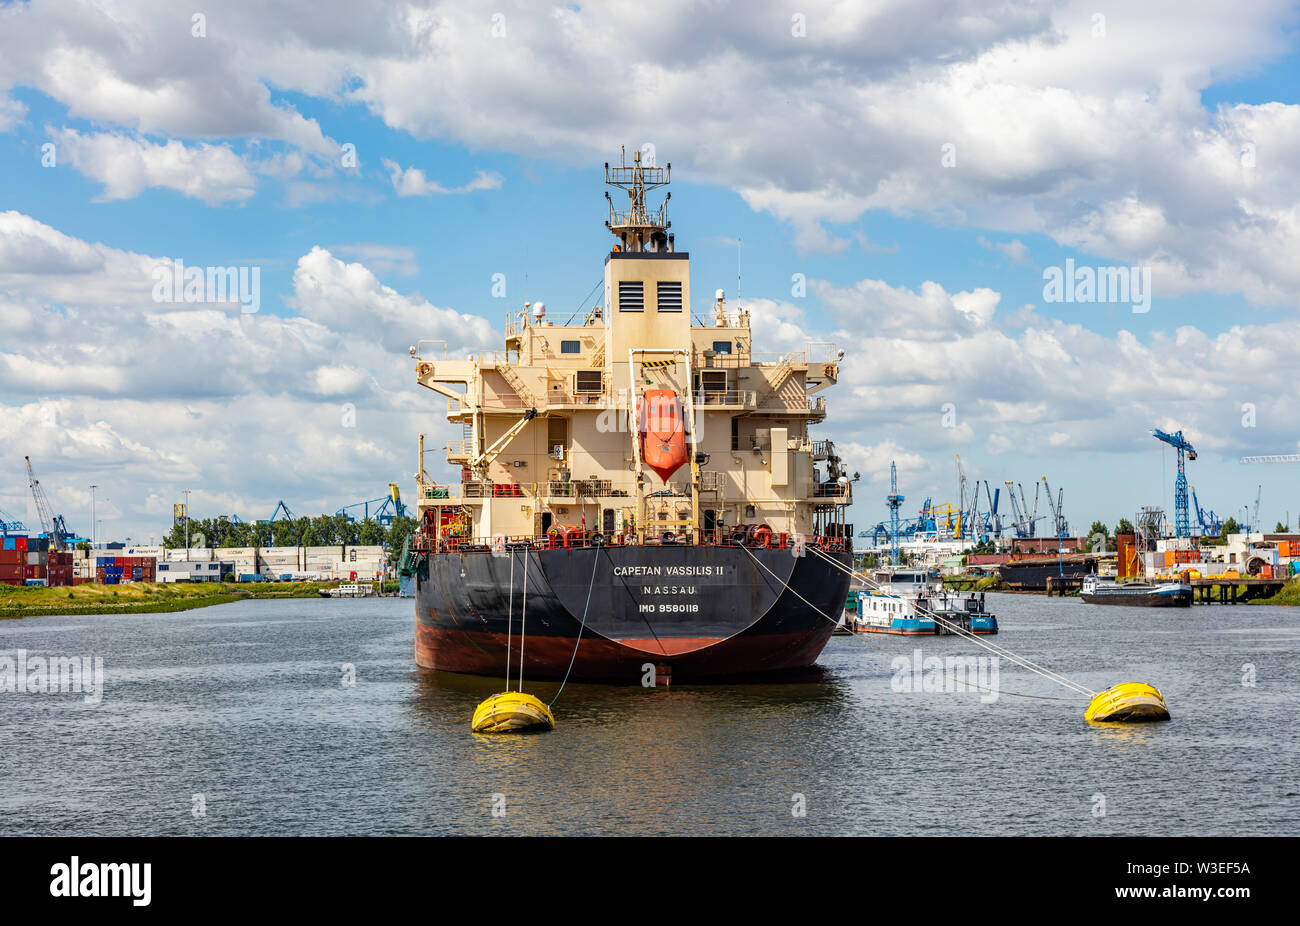 Rotterdam harbor, Netherlands. July 2nd, 2019. Ship anchored at international commercial port of Rotterdam, sunny summer day Photo - Alamy